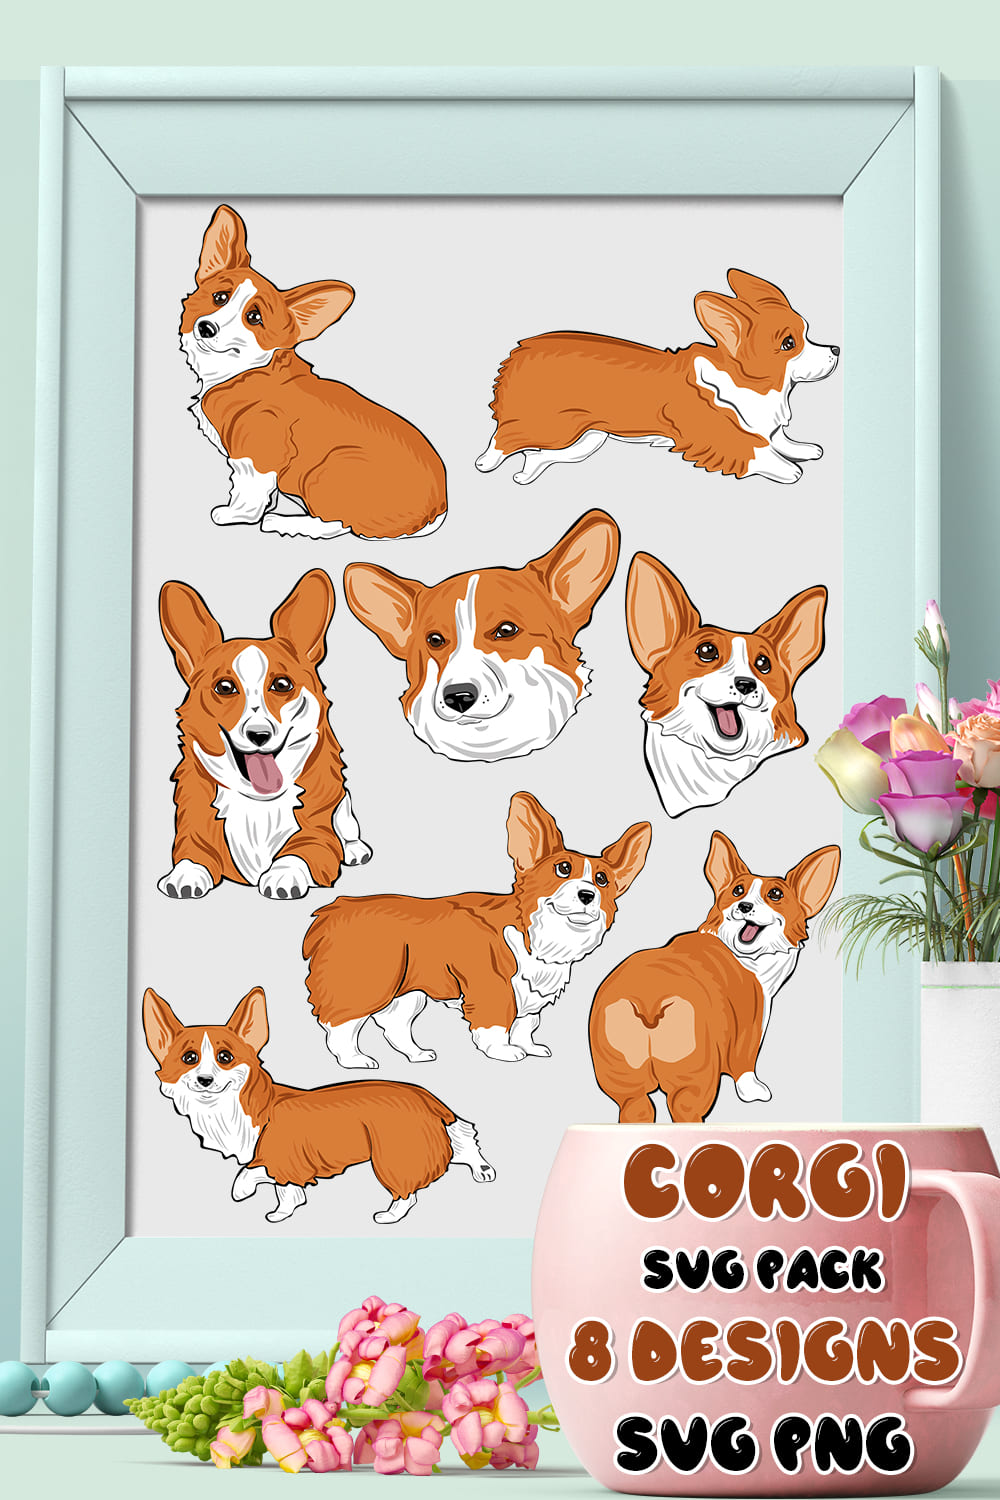 Picture of a picture of a corgi dog.